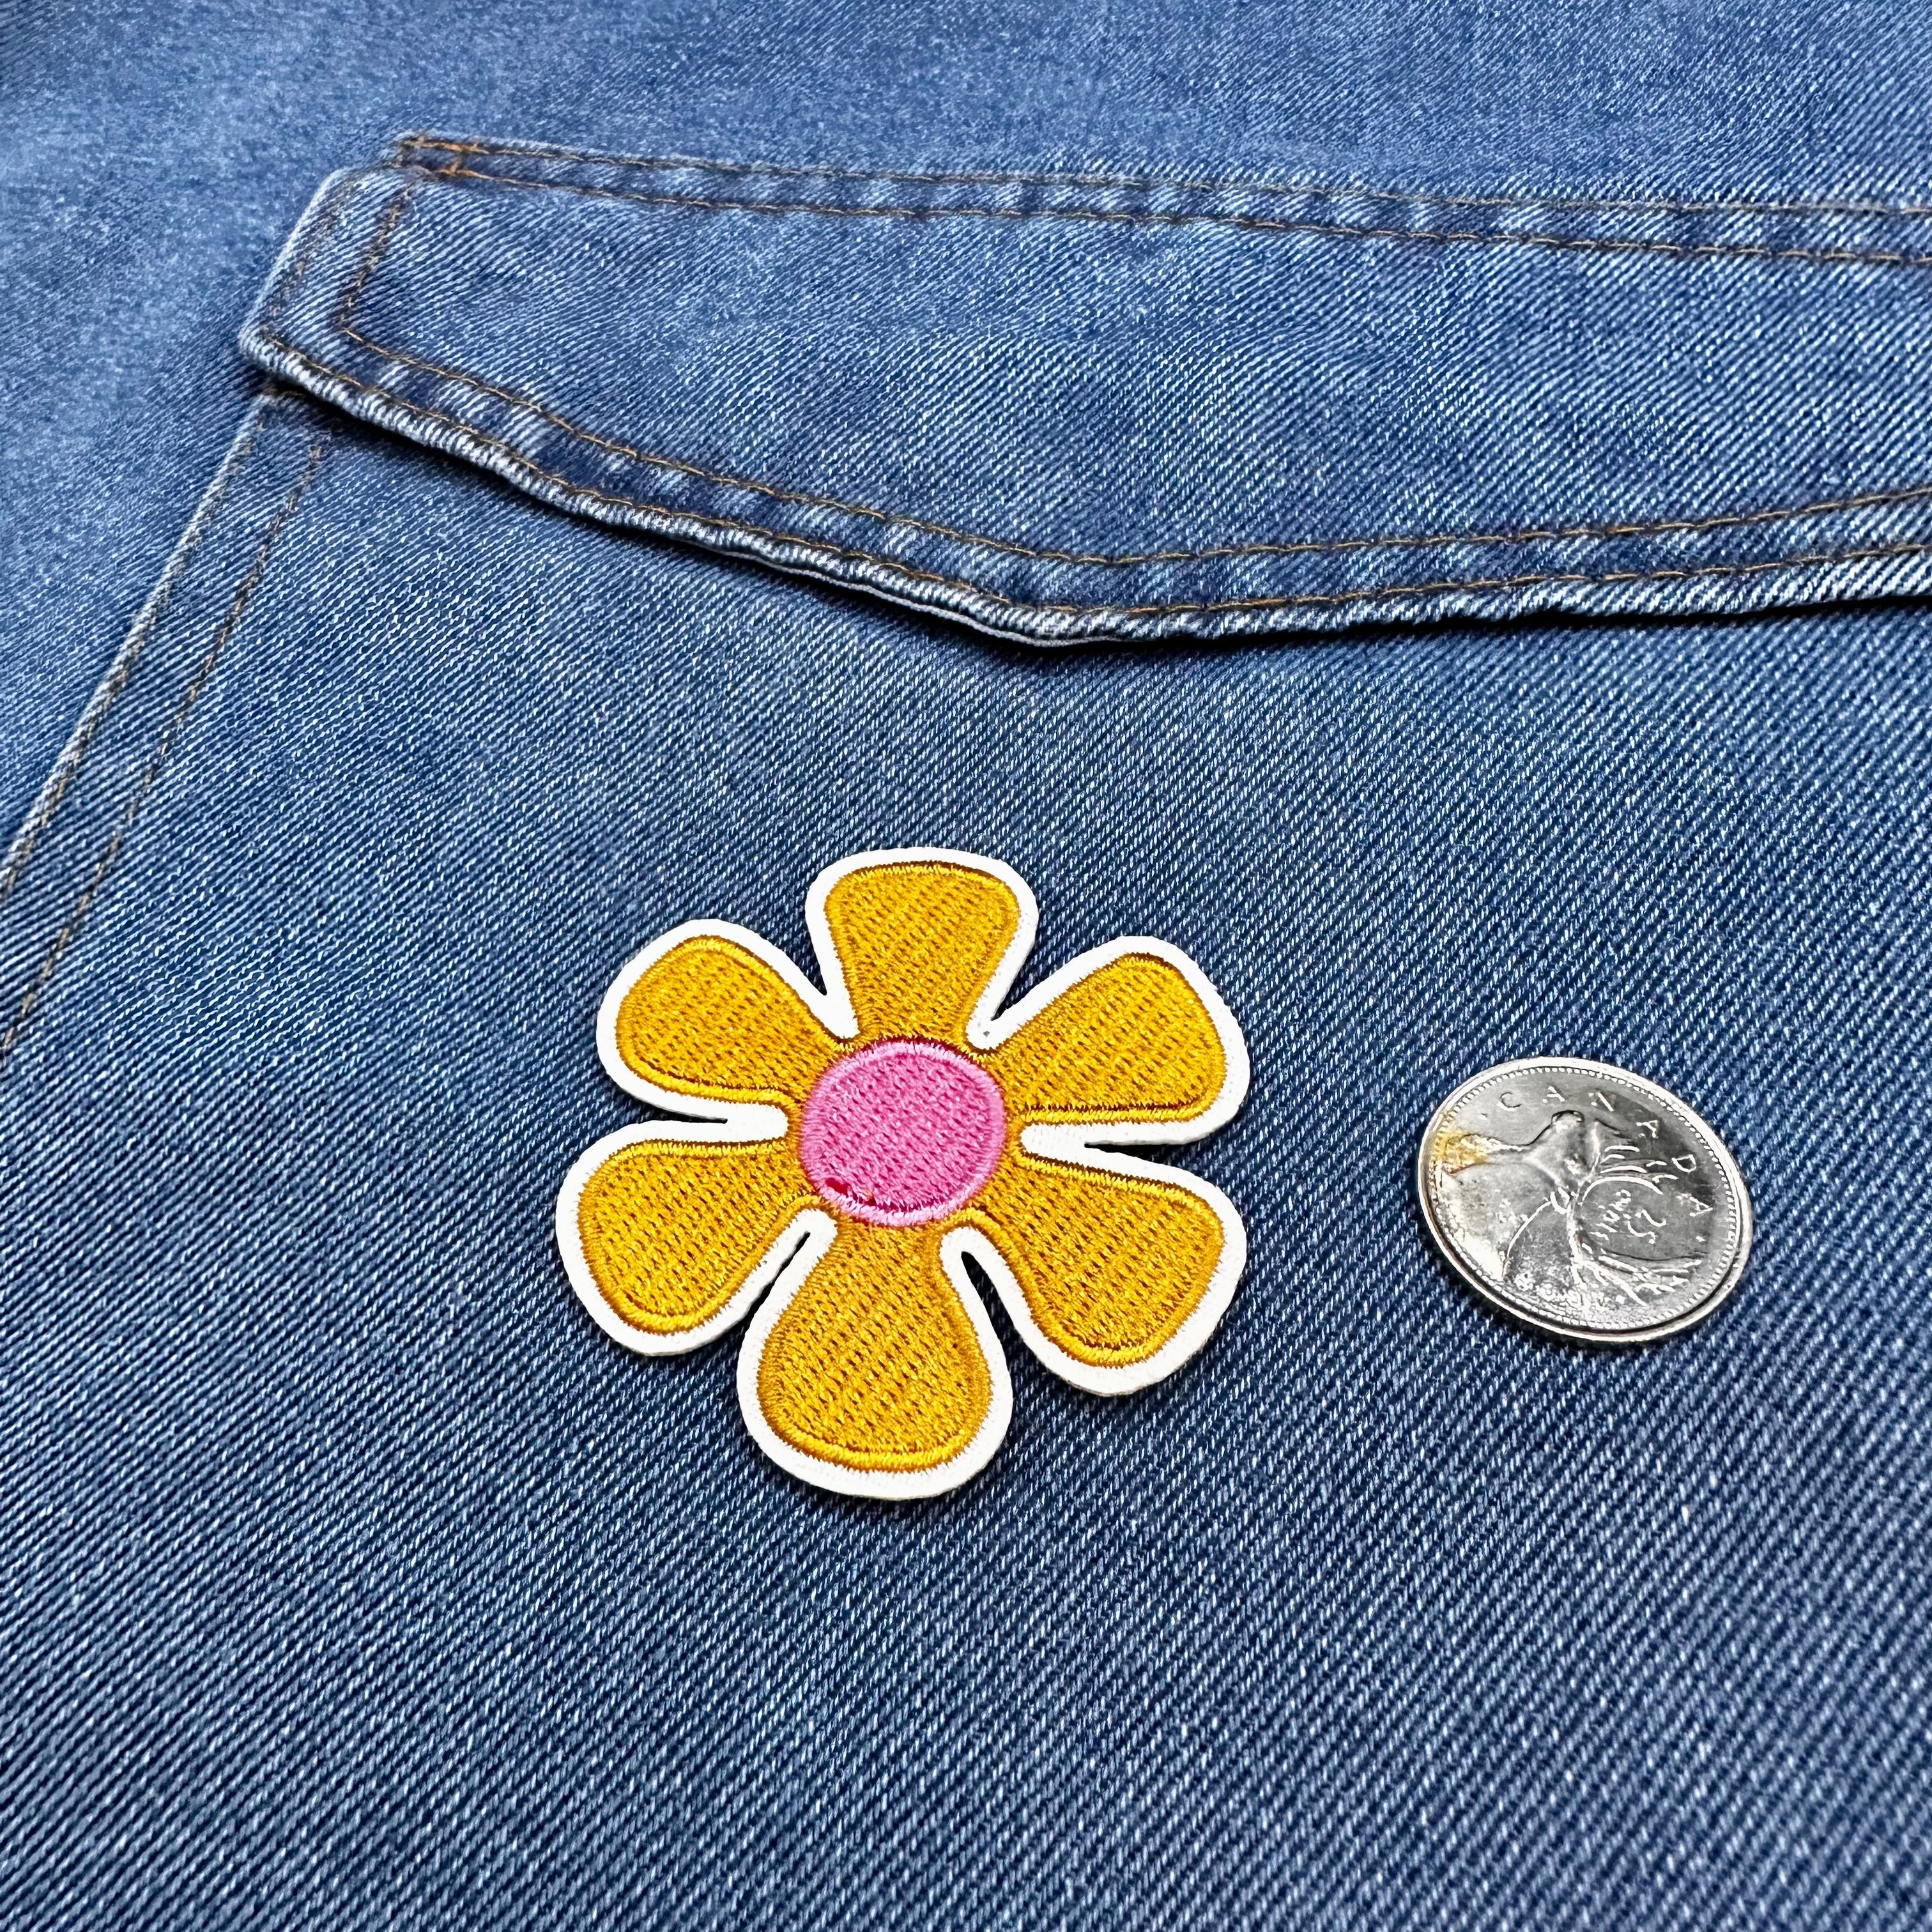 Iron On Patches - Groovy Flower